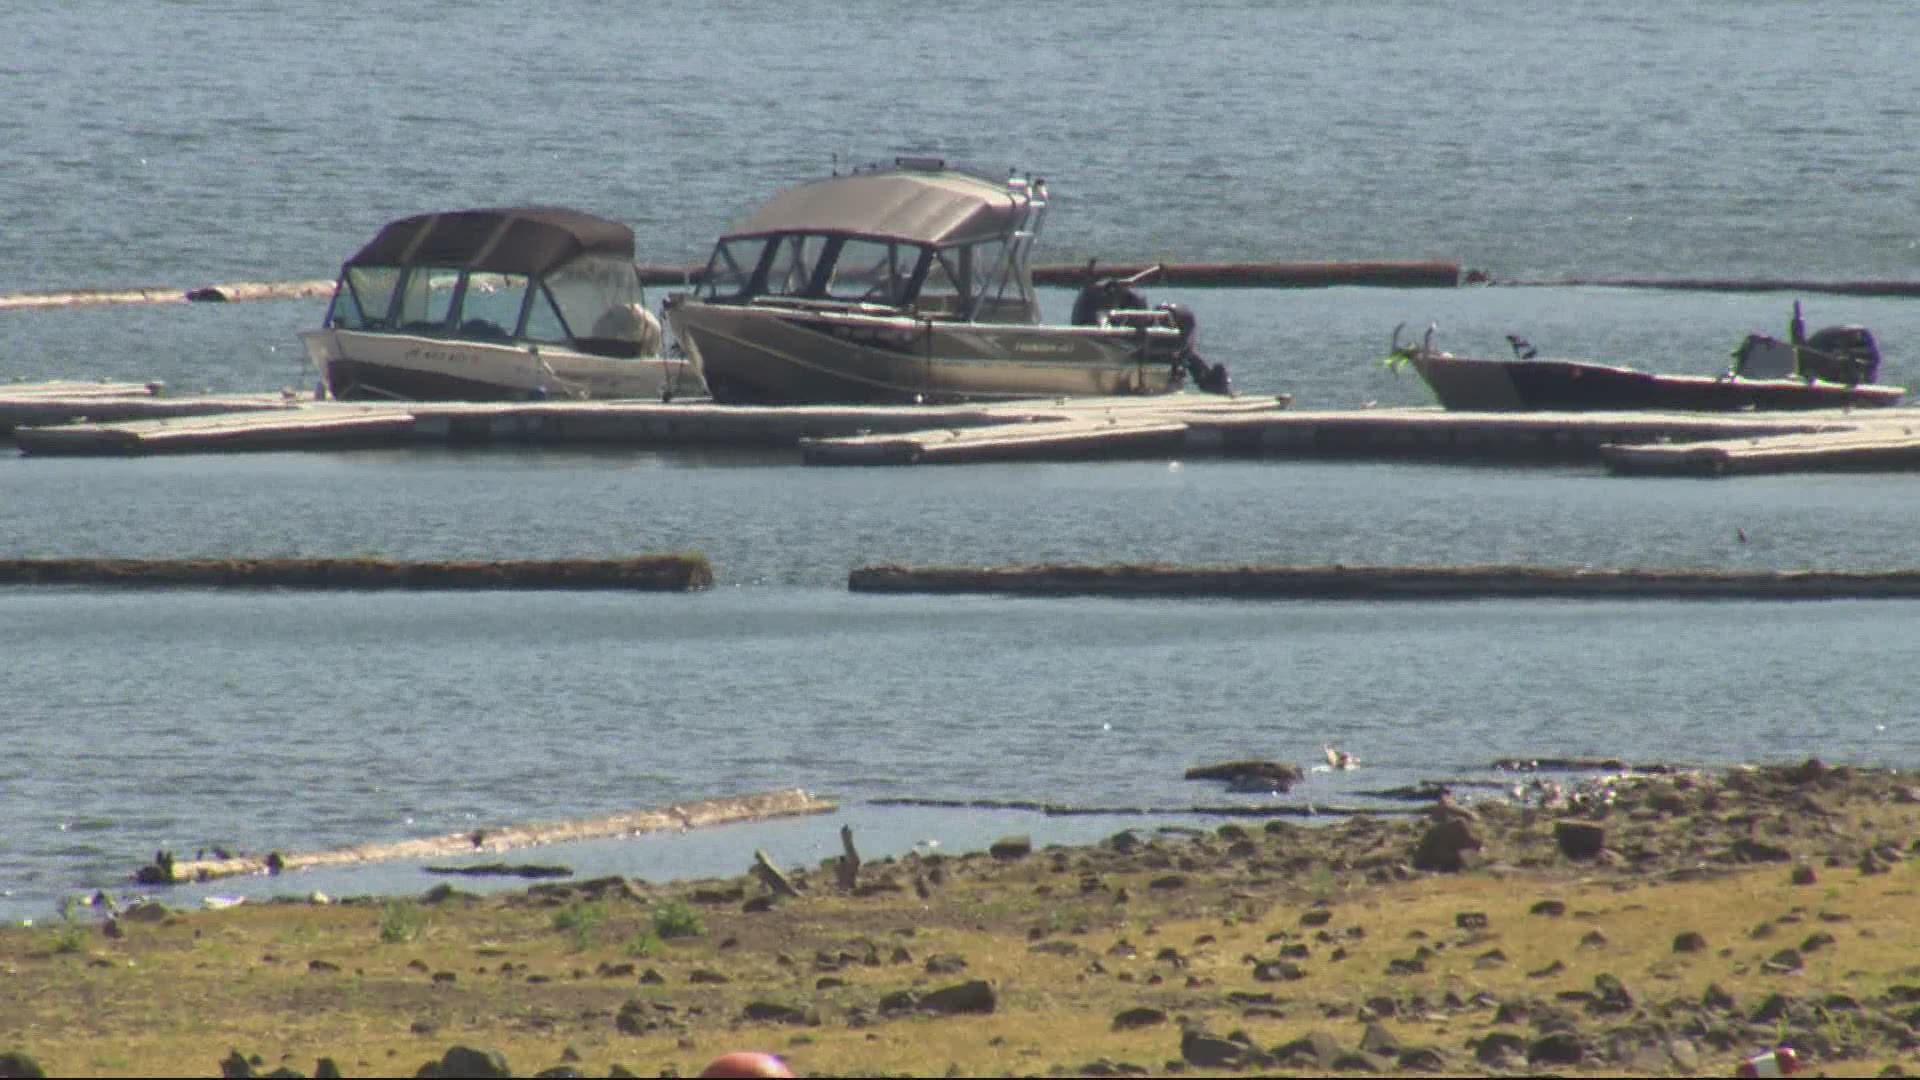 A warning for those hoping to play in area reservoirs this summer. Low water levels could become dangerous. Keely Chalmers reports.